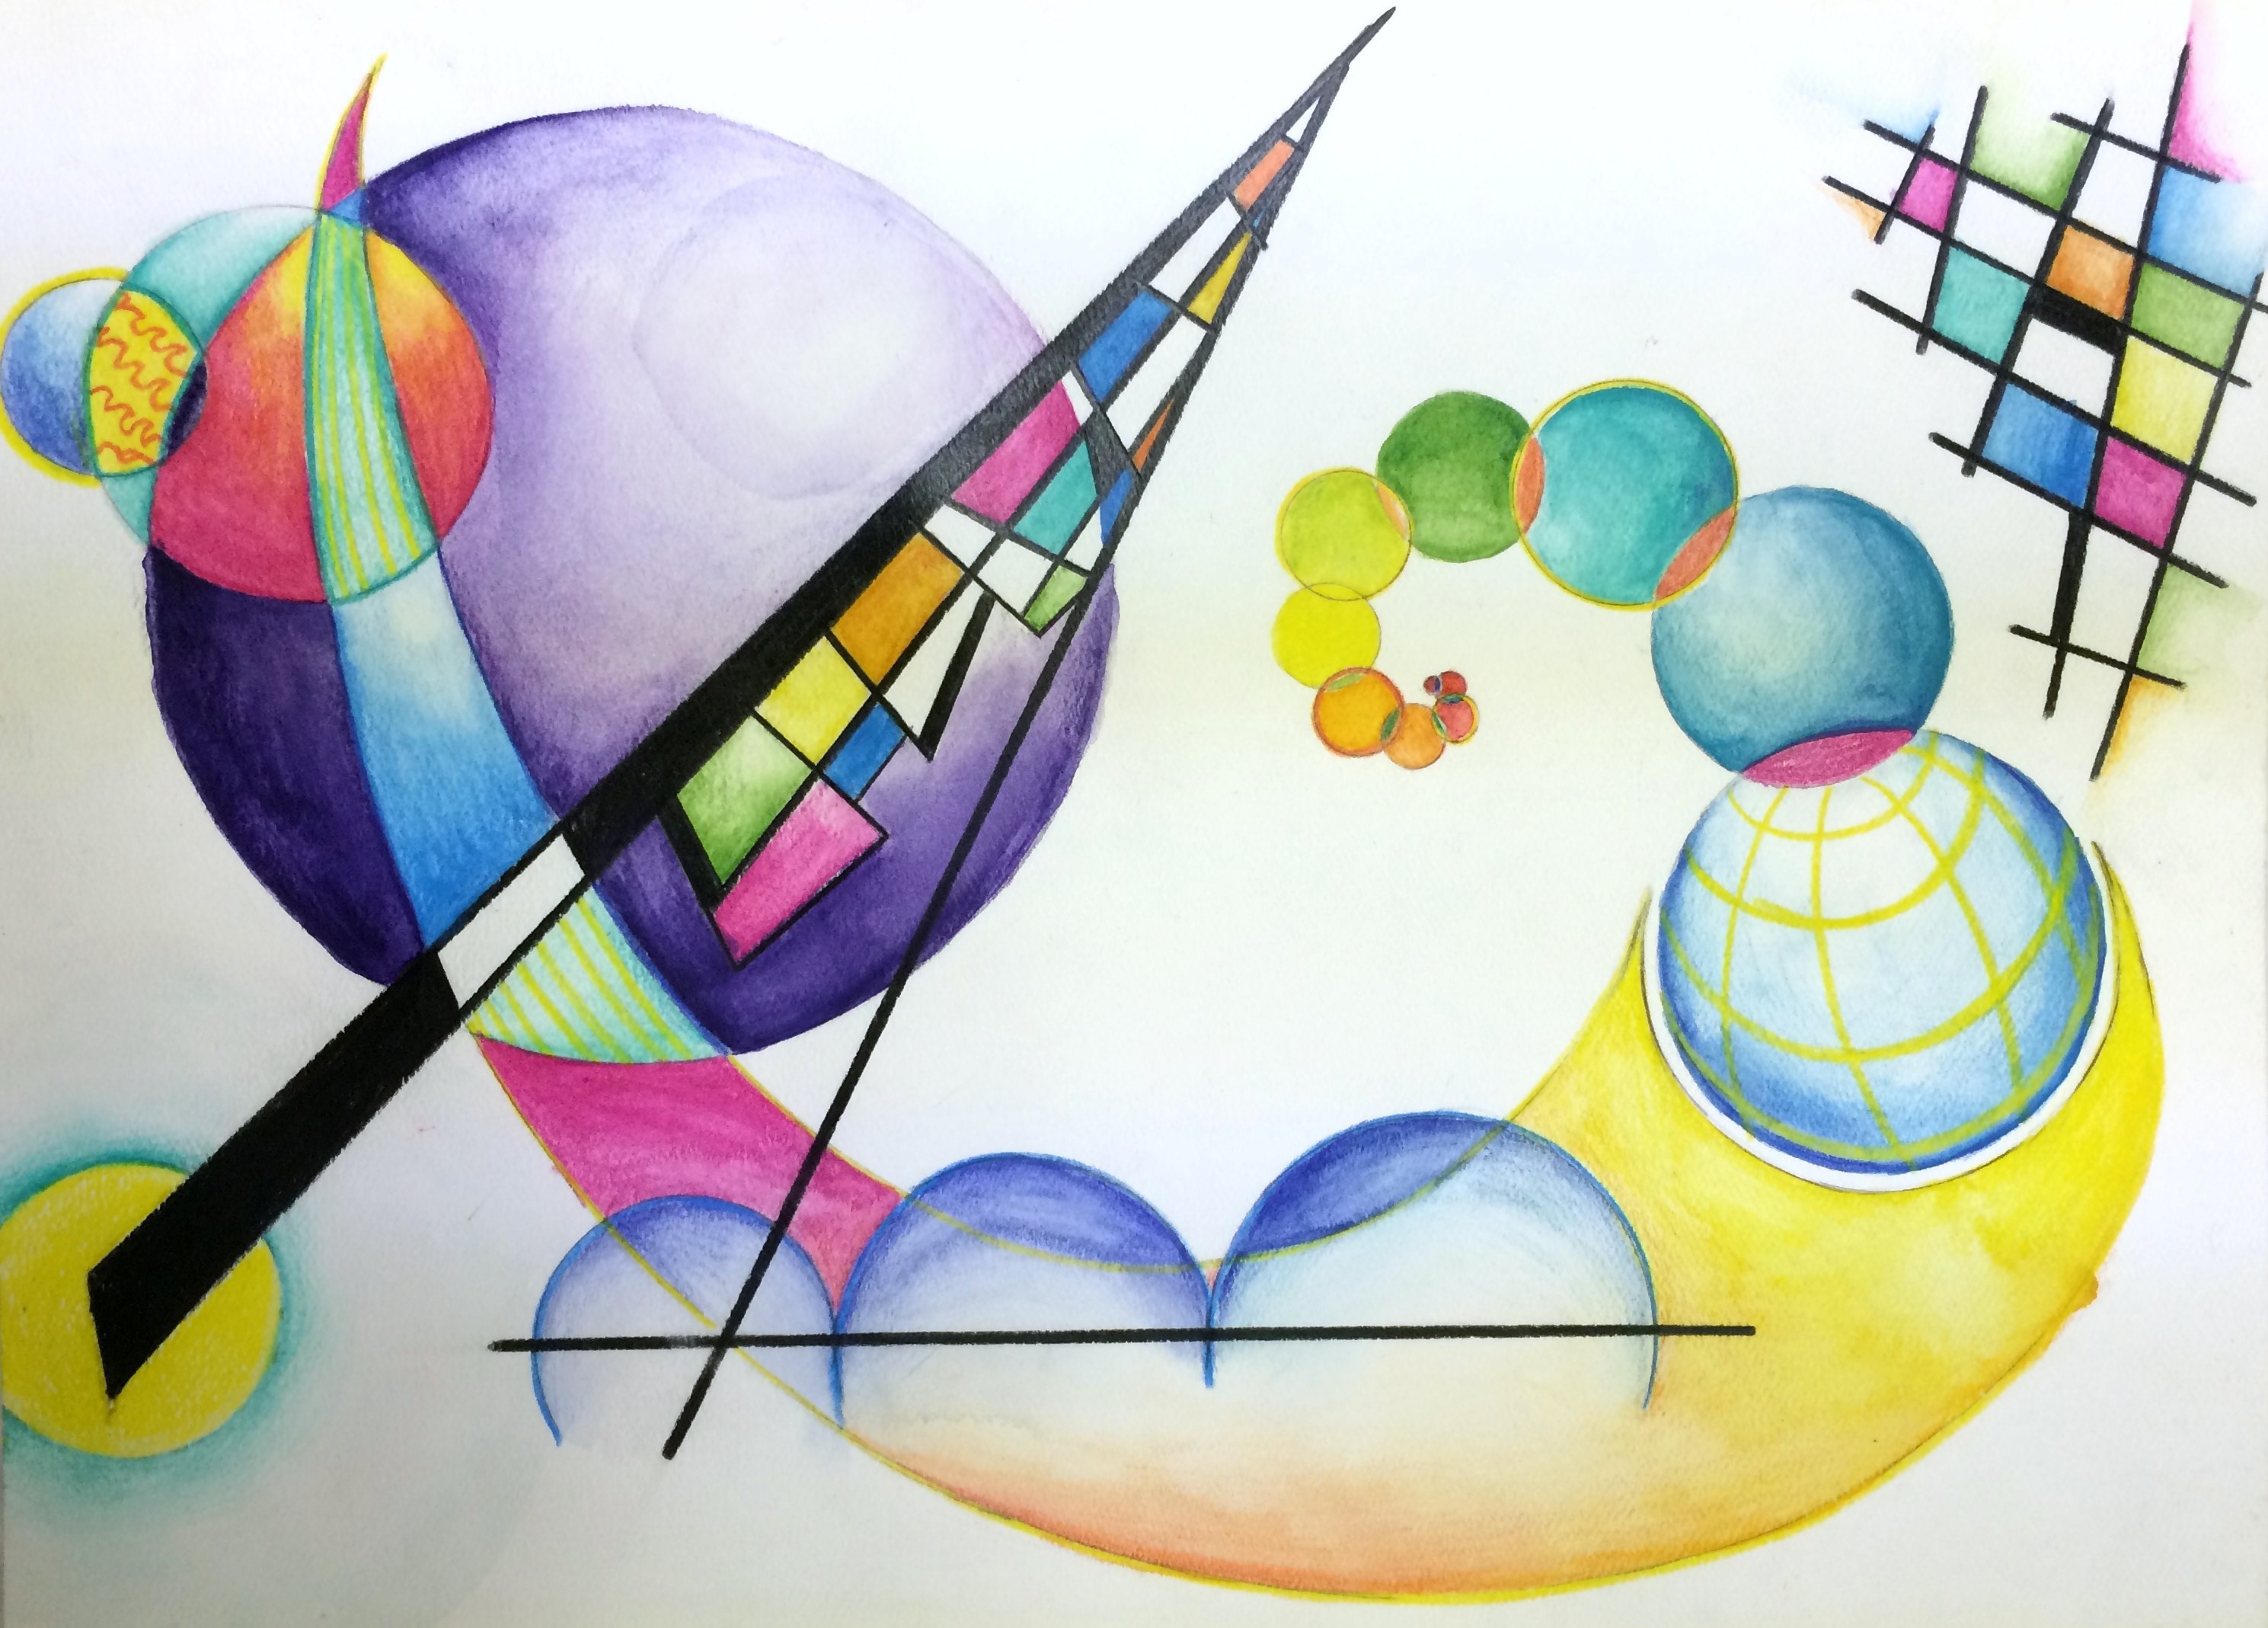 2978x2137 Wassily Kandinsky Non-Objective Color Pencil and Watercolor Pencil Painting